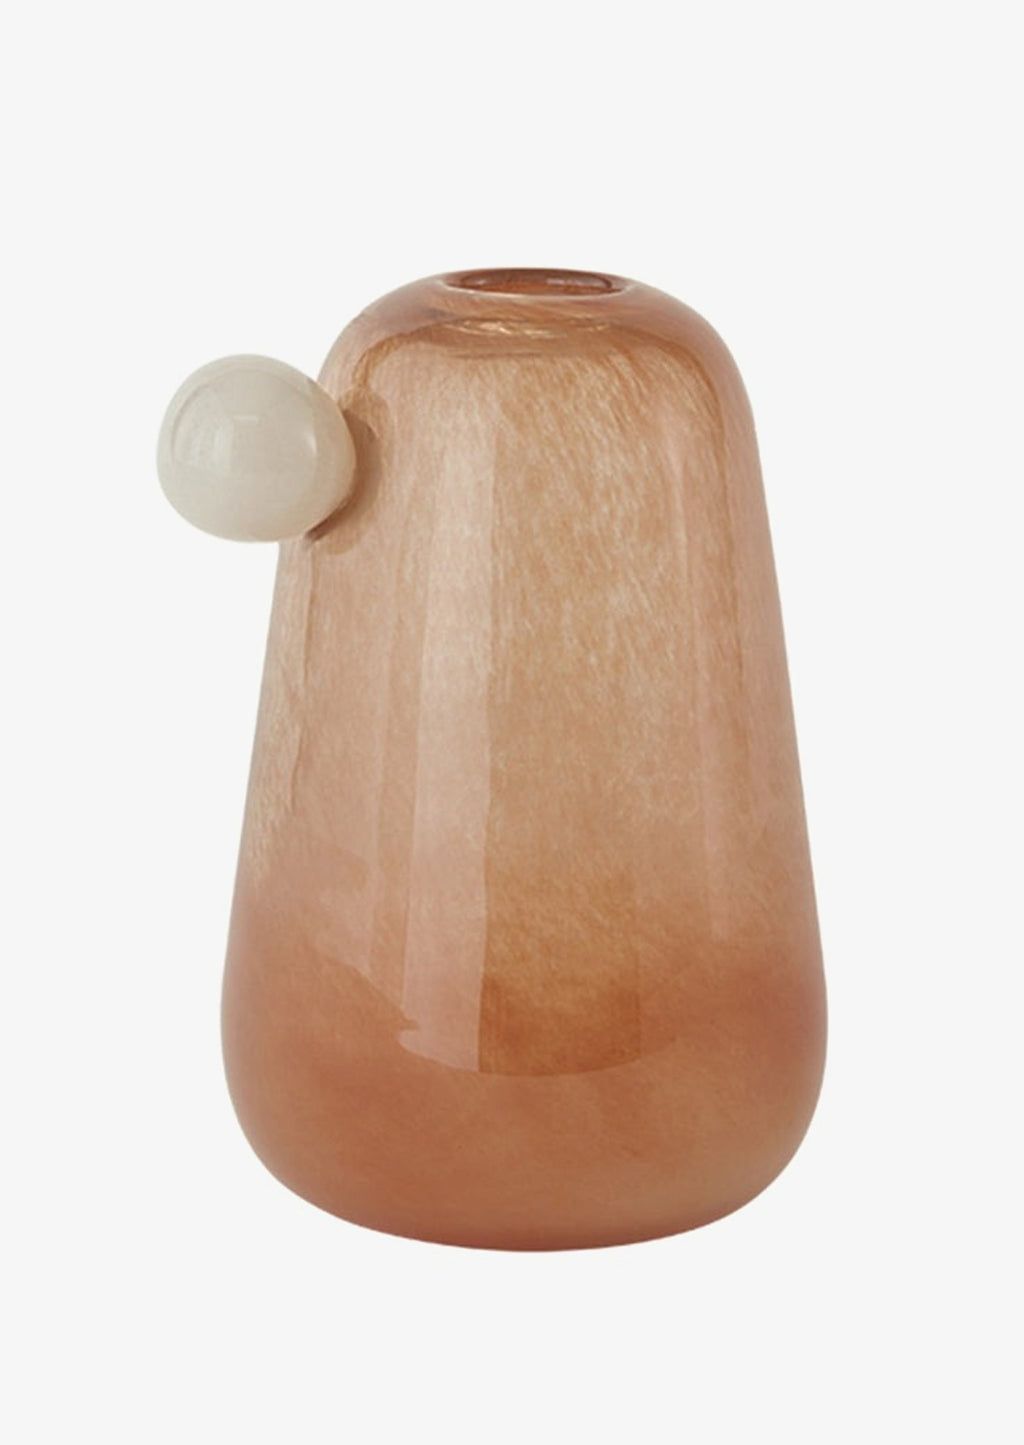 Light Brown: A glass vase in brown with white "bauble" knob detailing at top.